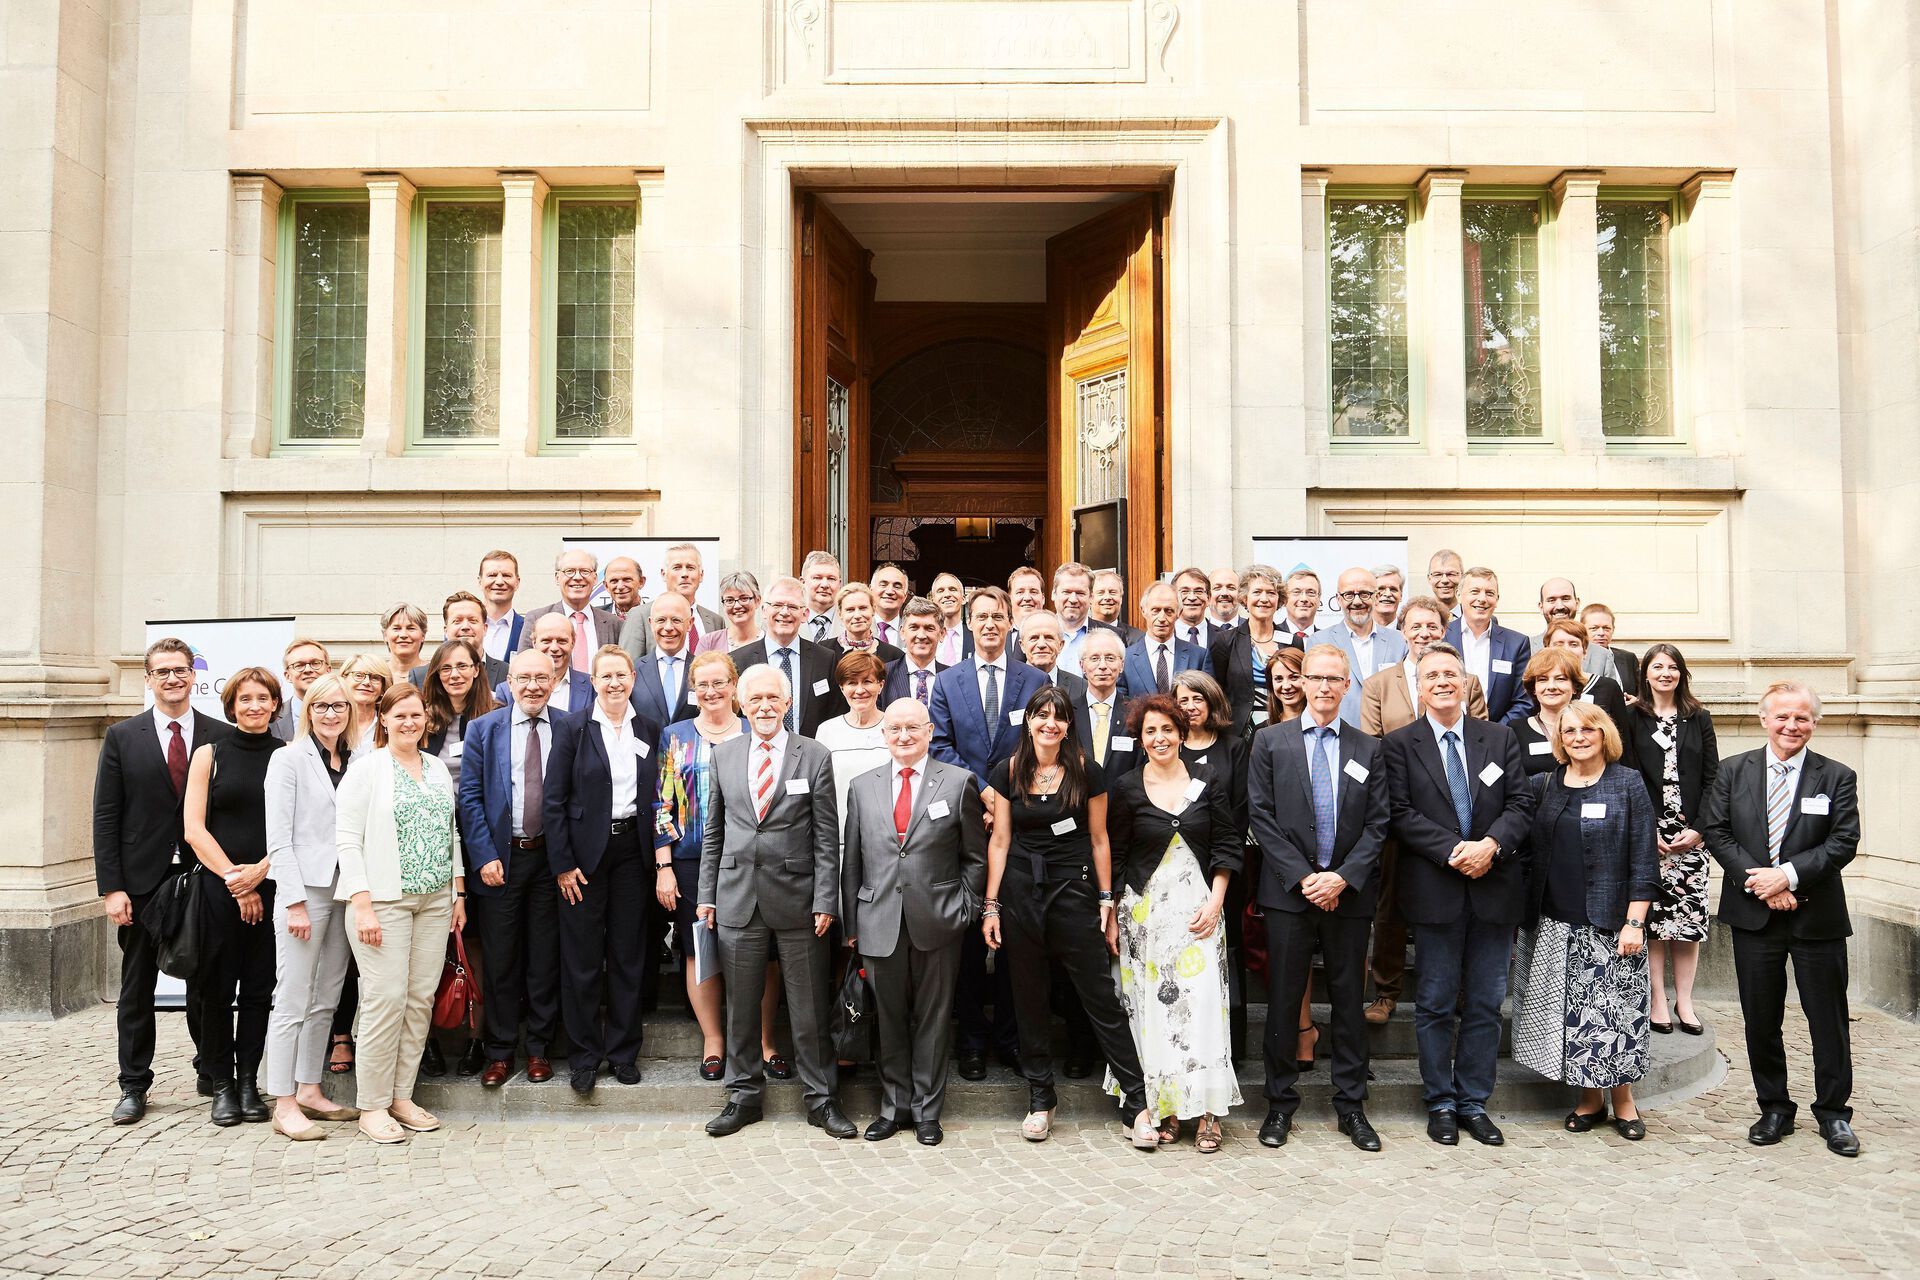 Representatives from the Guild member universities/Photographed by F. de Ribaucourt.
On June 2, we welcomed the University of Bern as our 19th member, and we elected a new board, chaired by Vincent Blondel - Rector of the University of Louvain.